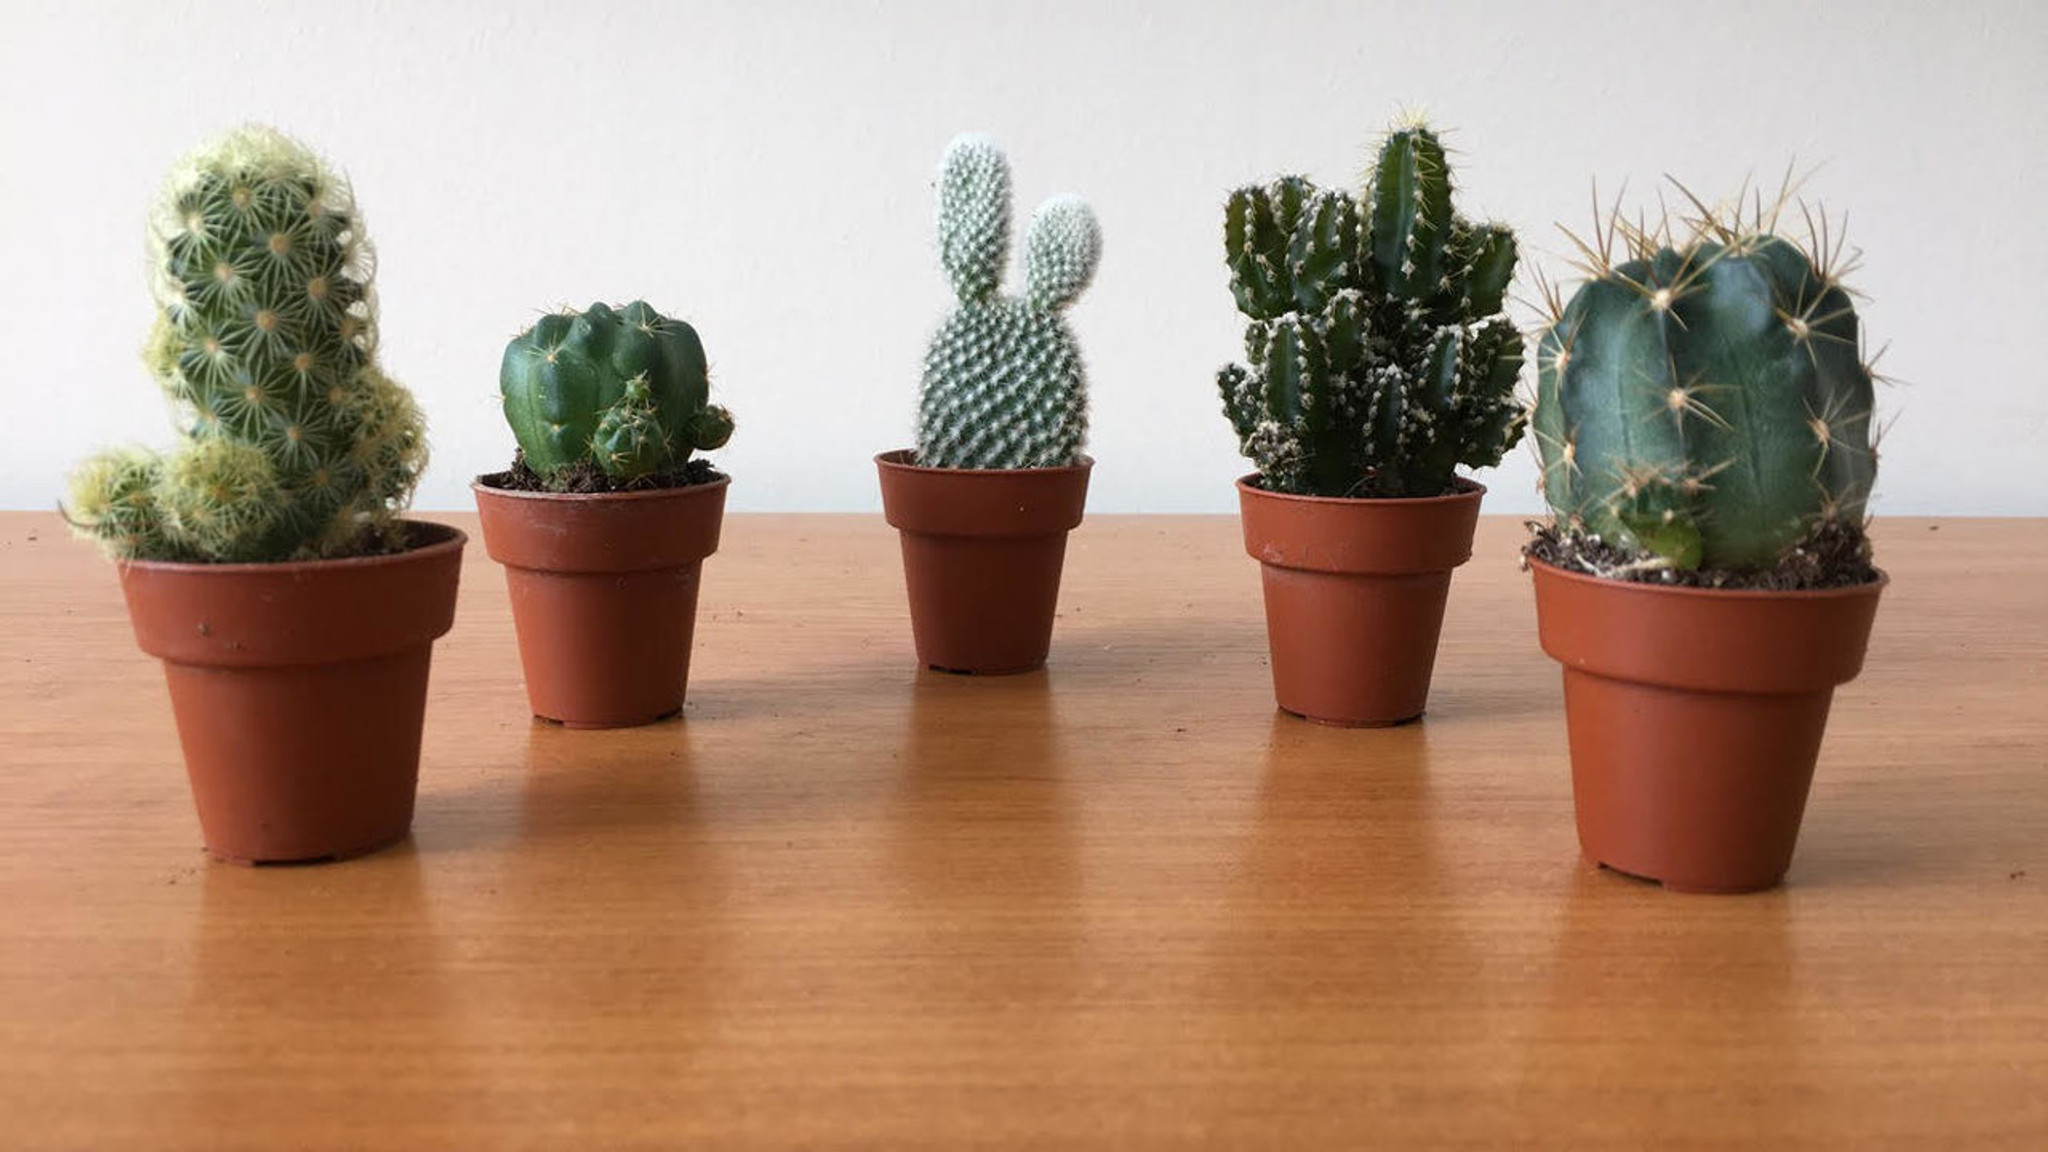 GIFT SET of 5  Sweet Little Cactus .
Limited Stock.